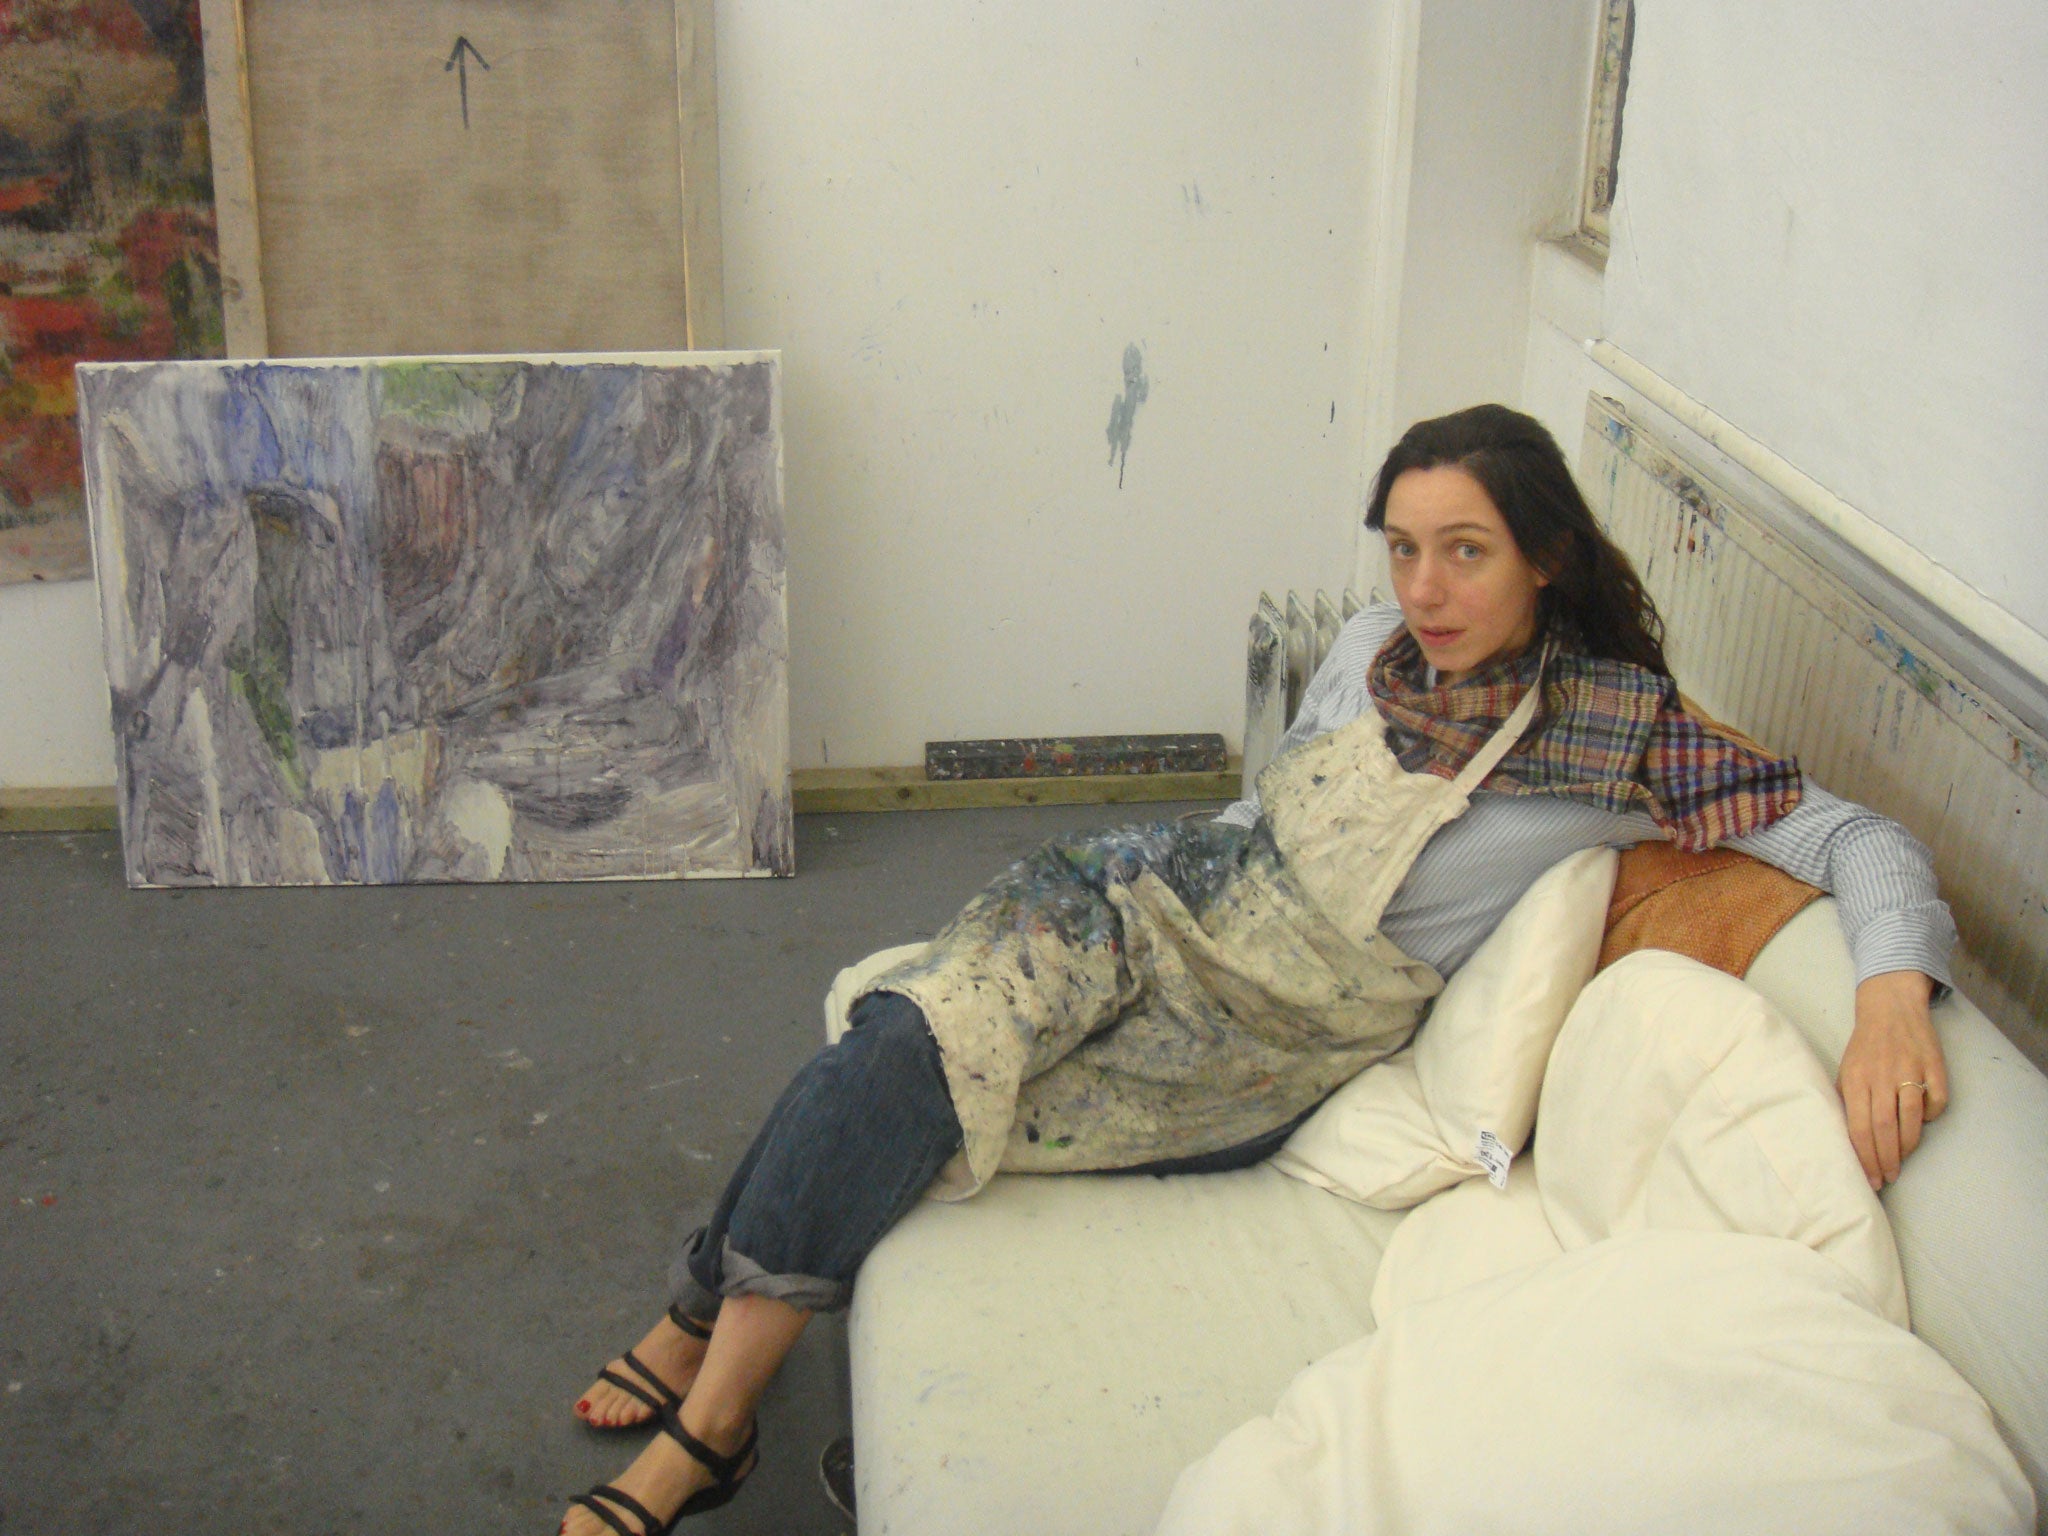 In the studio: Varda Caivano, artist - 'My paintings are like thoughts